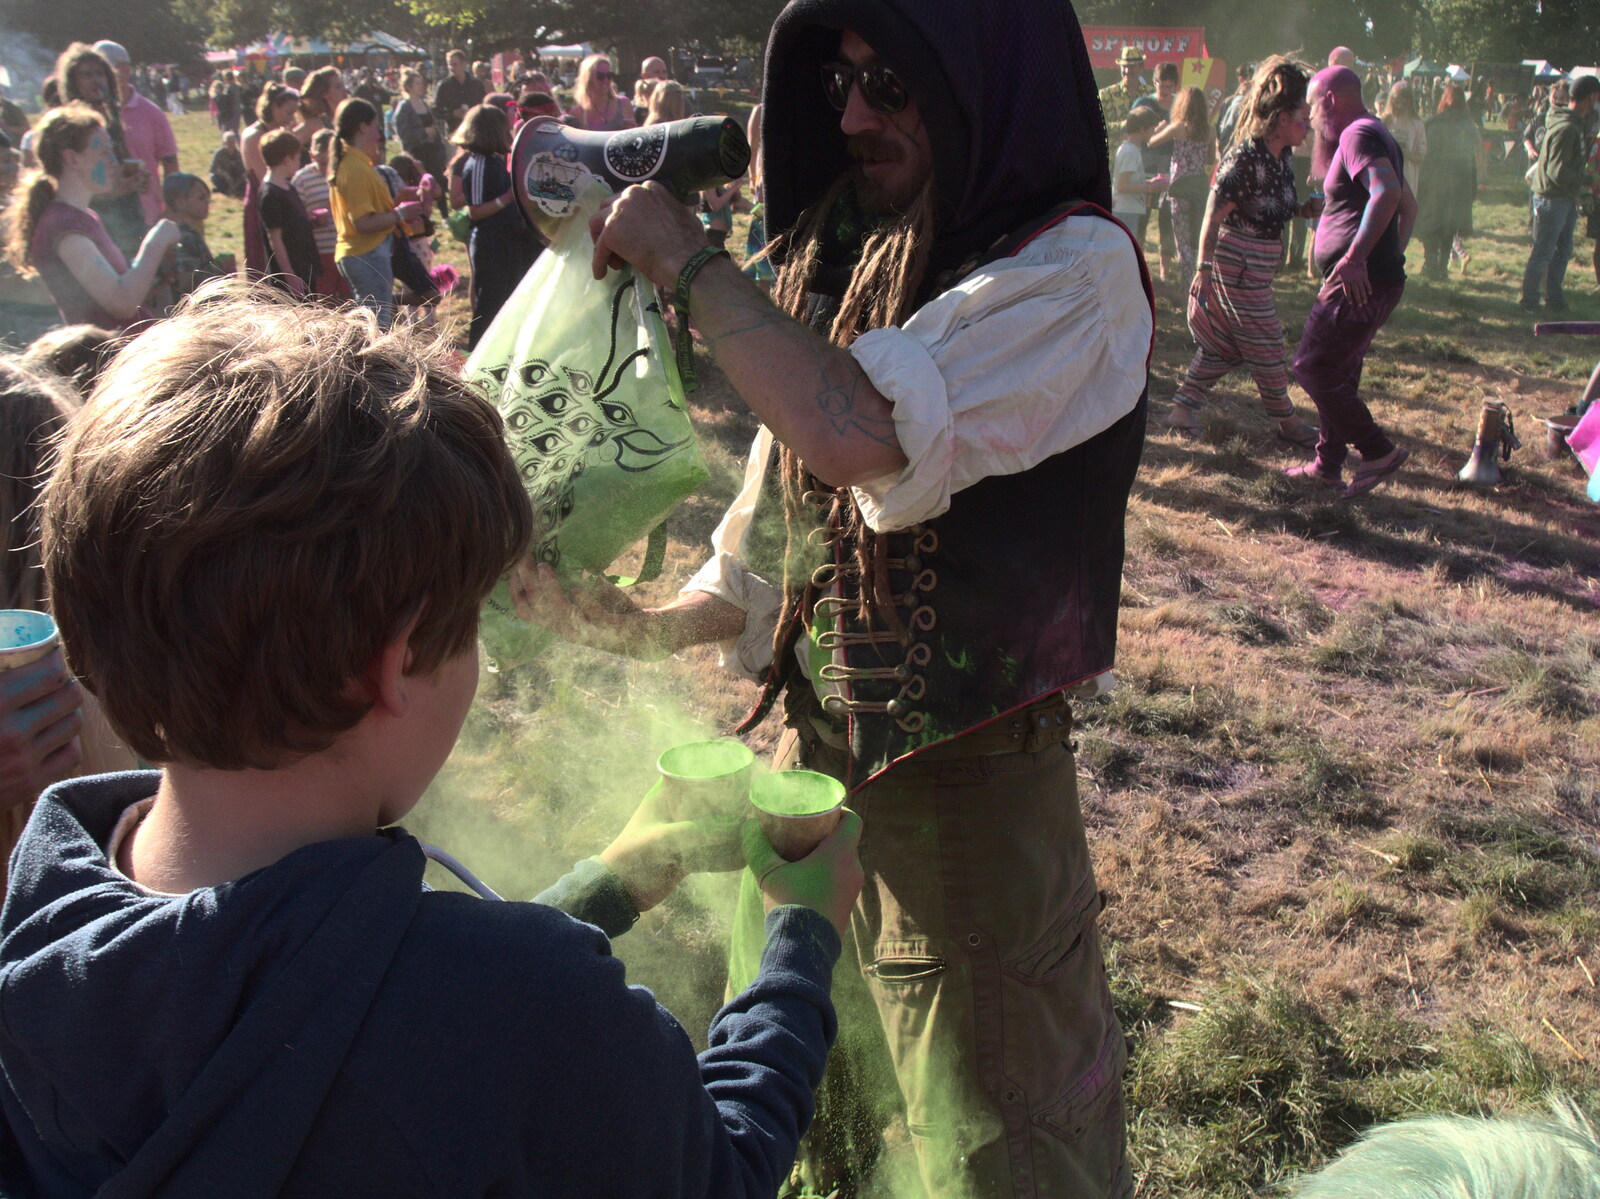 Fred gets some green paint from Maui Waui Festival, Hill Farm, Gressenhall, Norfolk - 28th August 2021